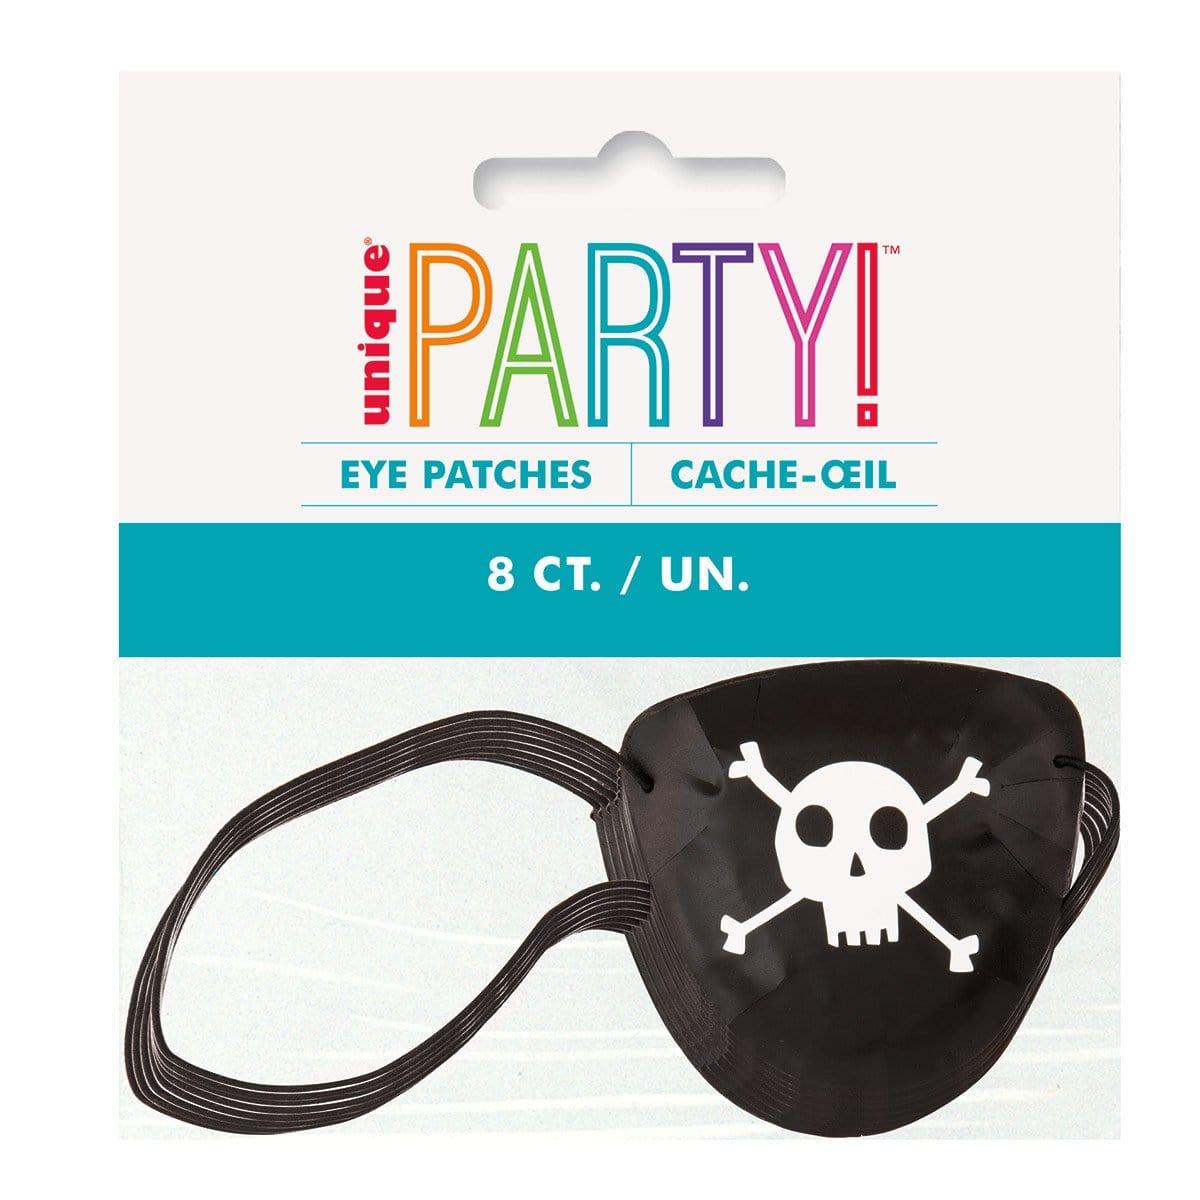 Buy Kids Birthday Ahoy Pirate Pirate Eye Patches, 8 Count sold at Party Expert